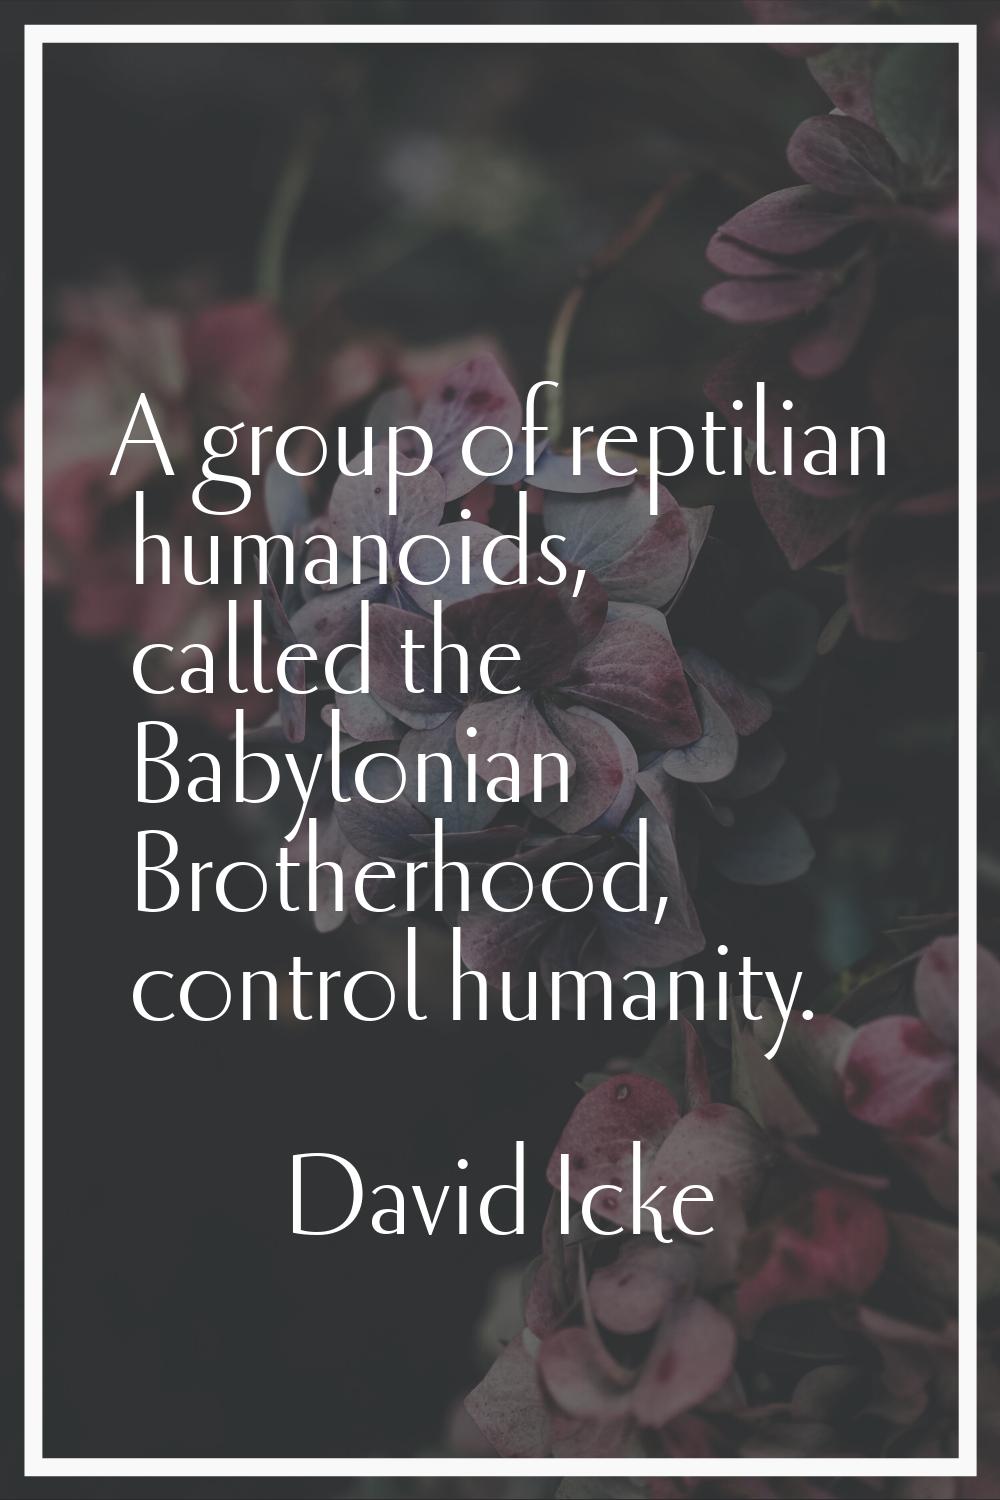 A group of reptilian humanoids, called the Babylonian Brotherhood, control humanity.